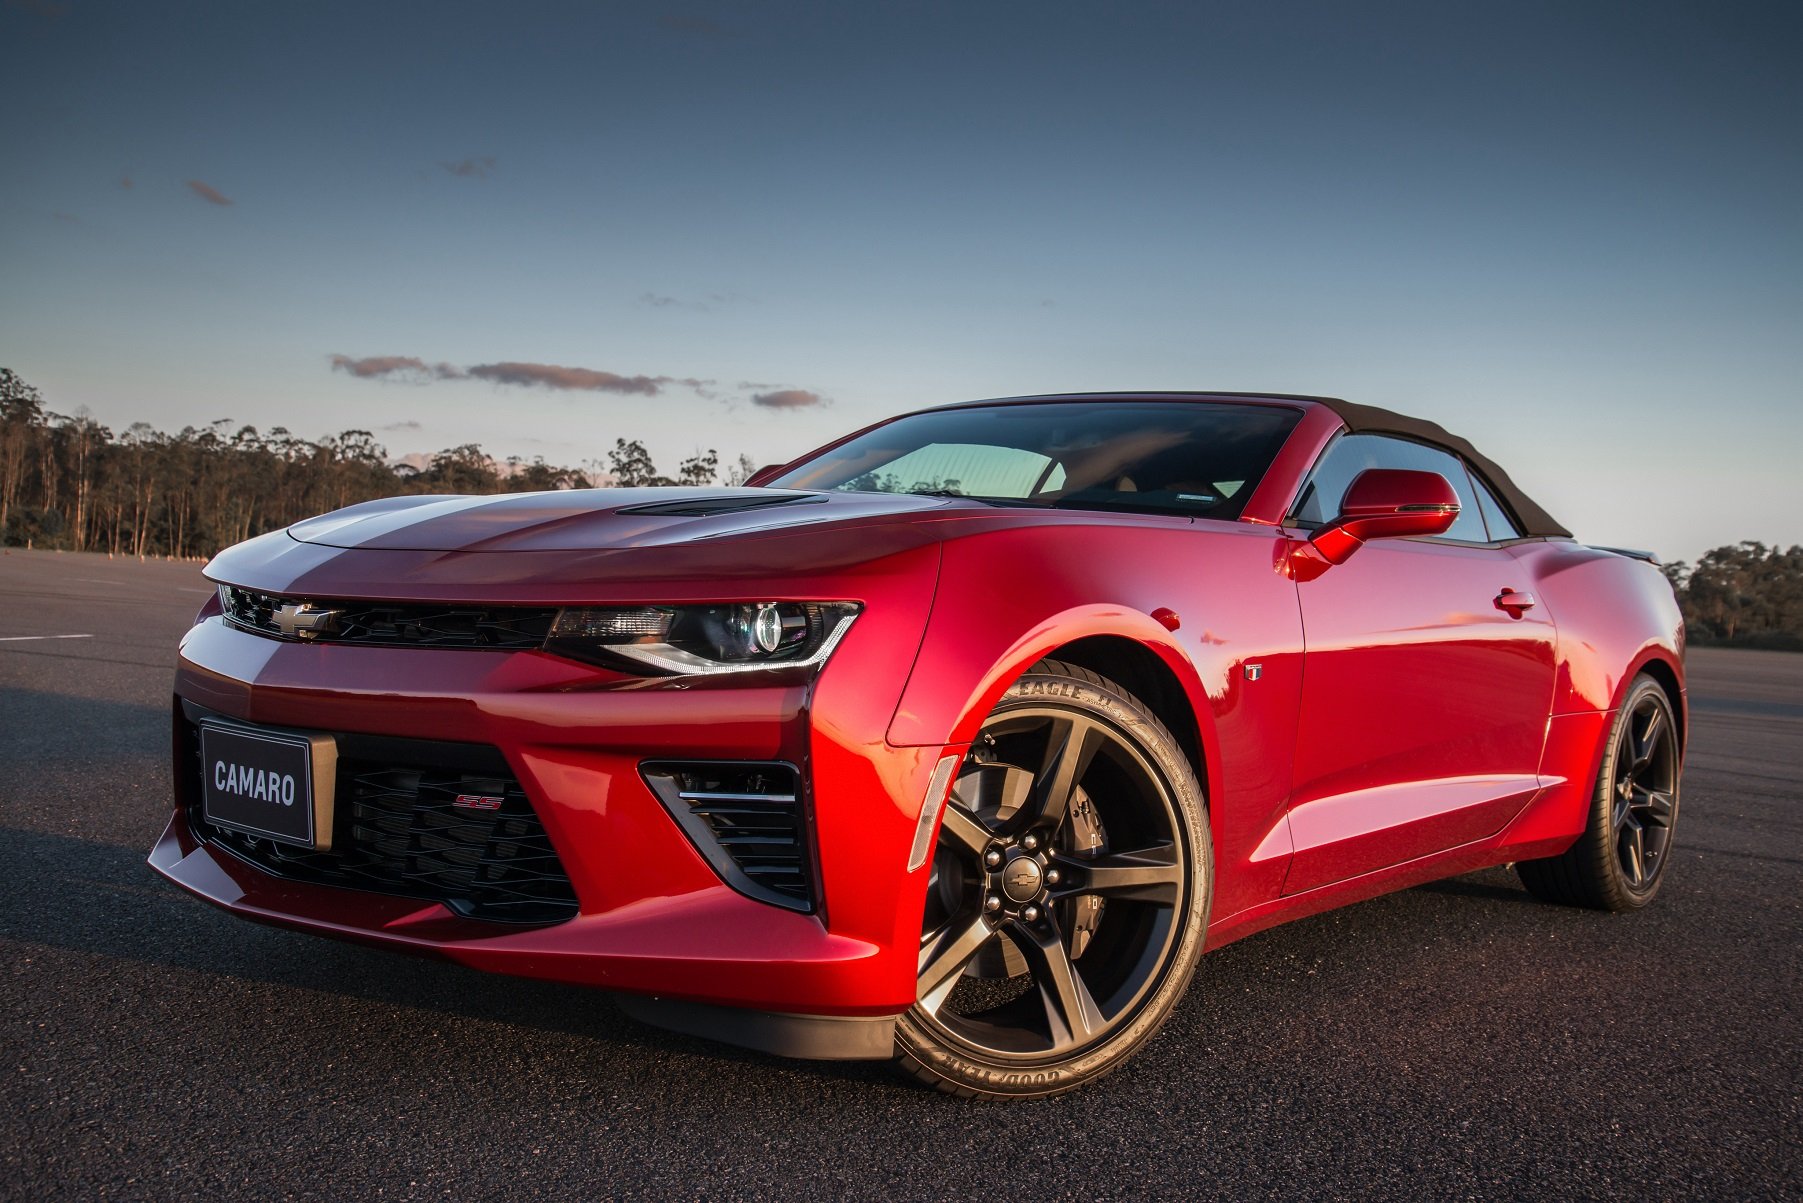 chevrolet, Camaro, ss , Convertible, Cars, Red, 2016